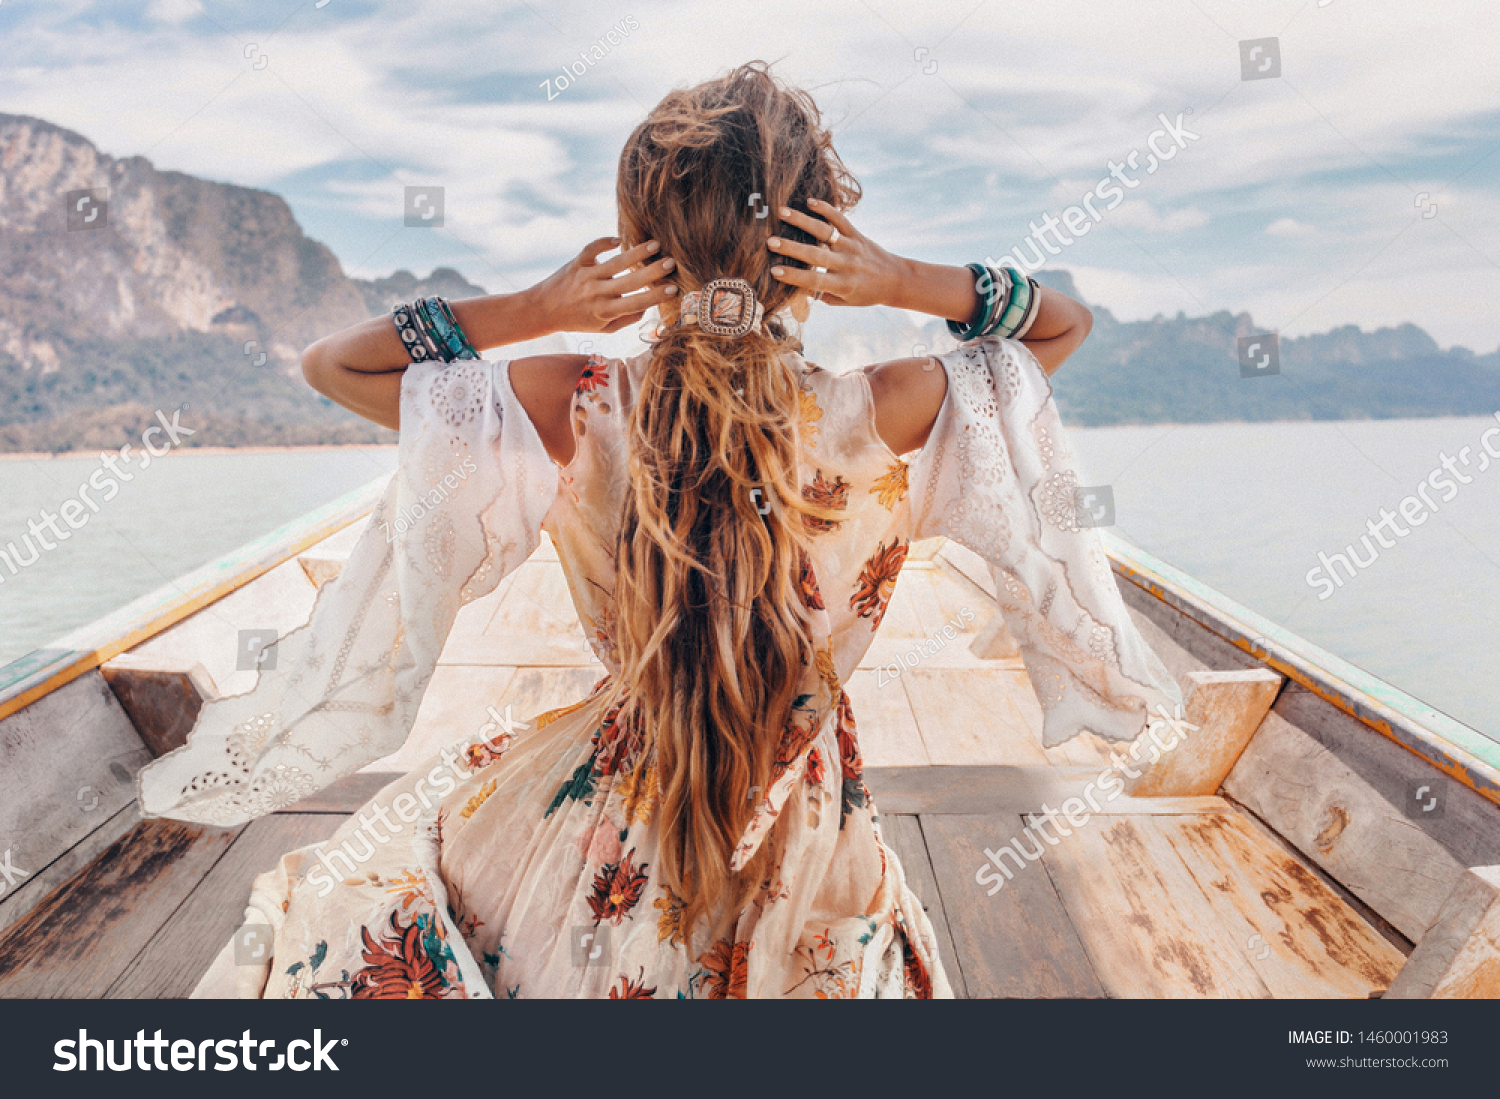 fashionable young model in boho style dress on boat at the lake  #1460001983